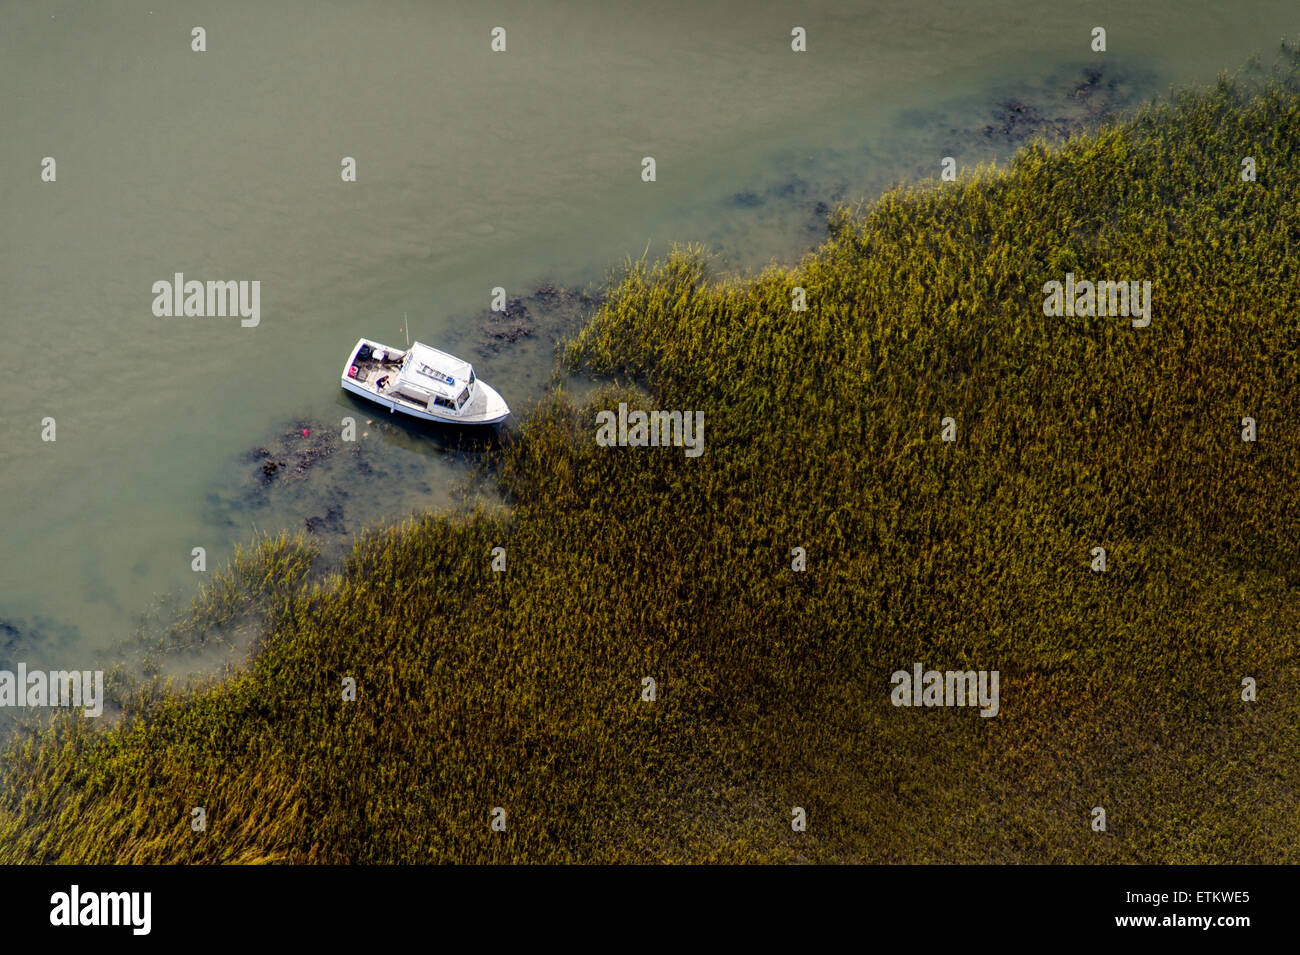 Aerial of small white boat parked near marshy vegetation in Georgia, USA Stock Photo